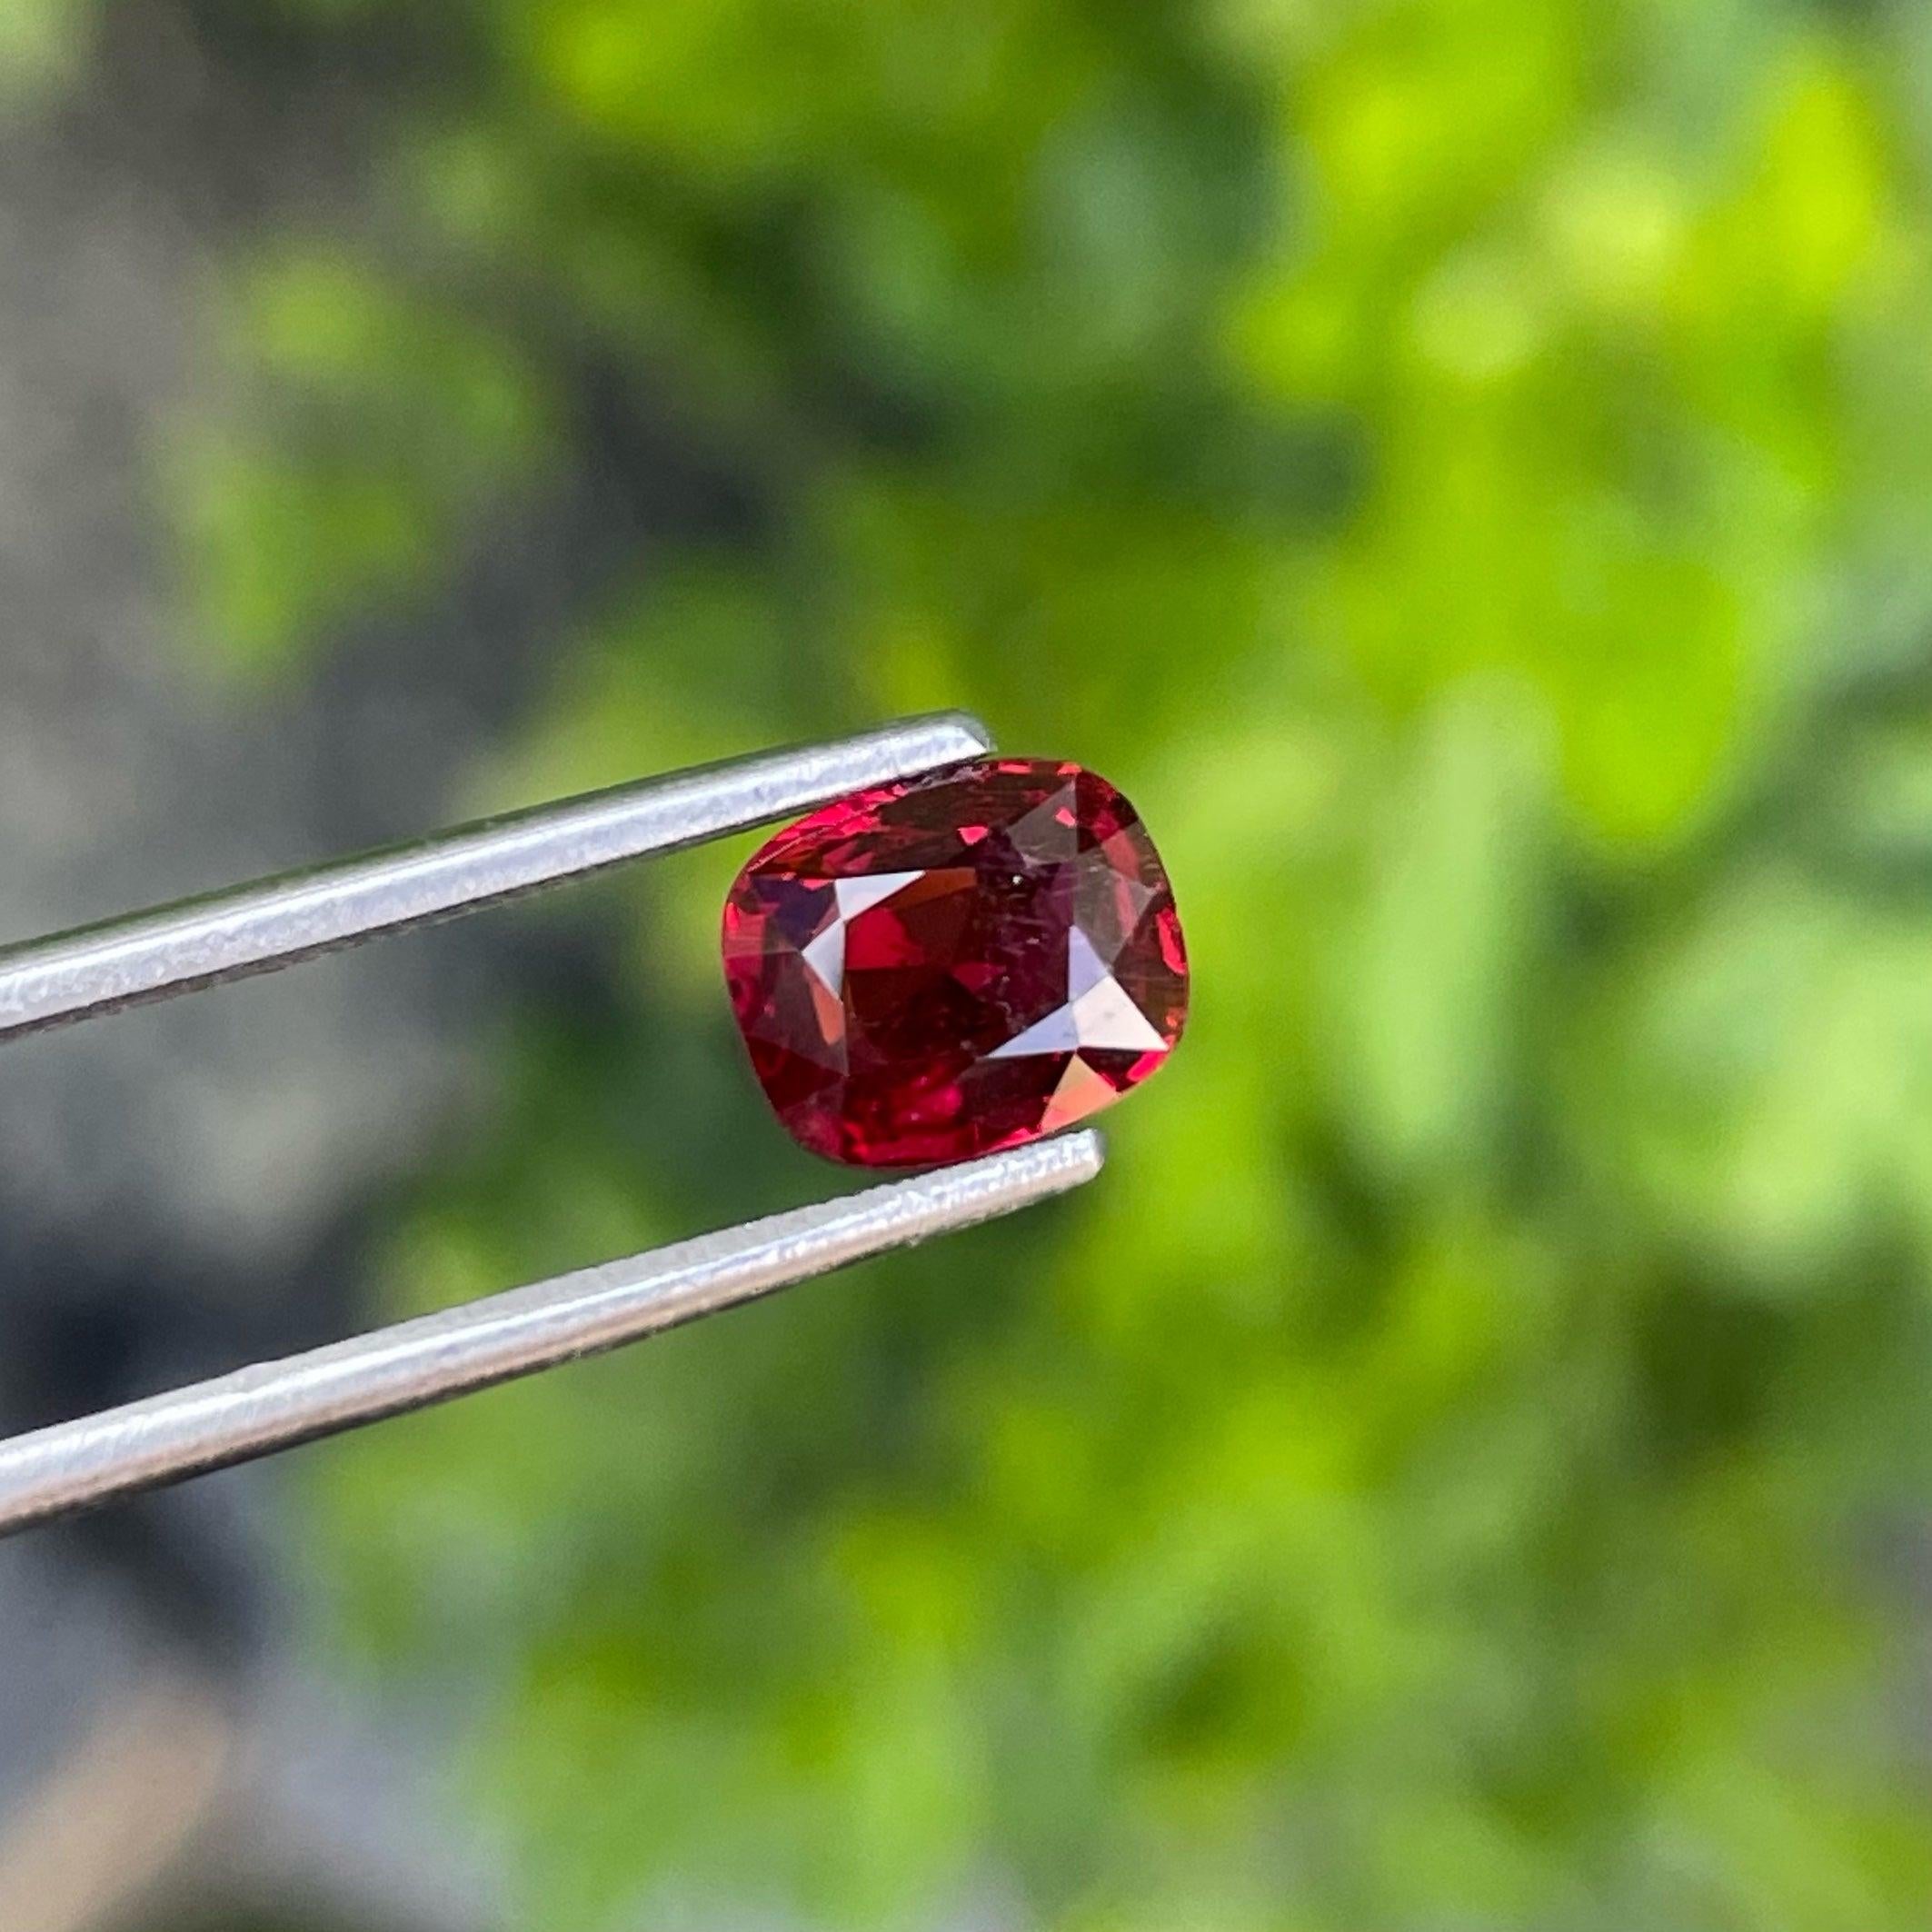 Natural Red Loose Spinel Gem, available for sale at wholesale price, natural high-quality SI Clarity cushion-cut, 1.08 carats loose certified spinel gemstone from Burma.

GEMSTONE TYPE	Natural Red Loose Spinel Gem
WEIGHT	1.08 carats
DIMENSIONS	6.9 x